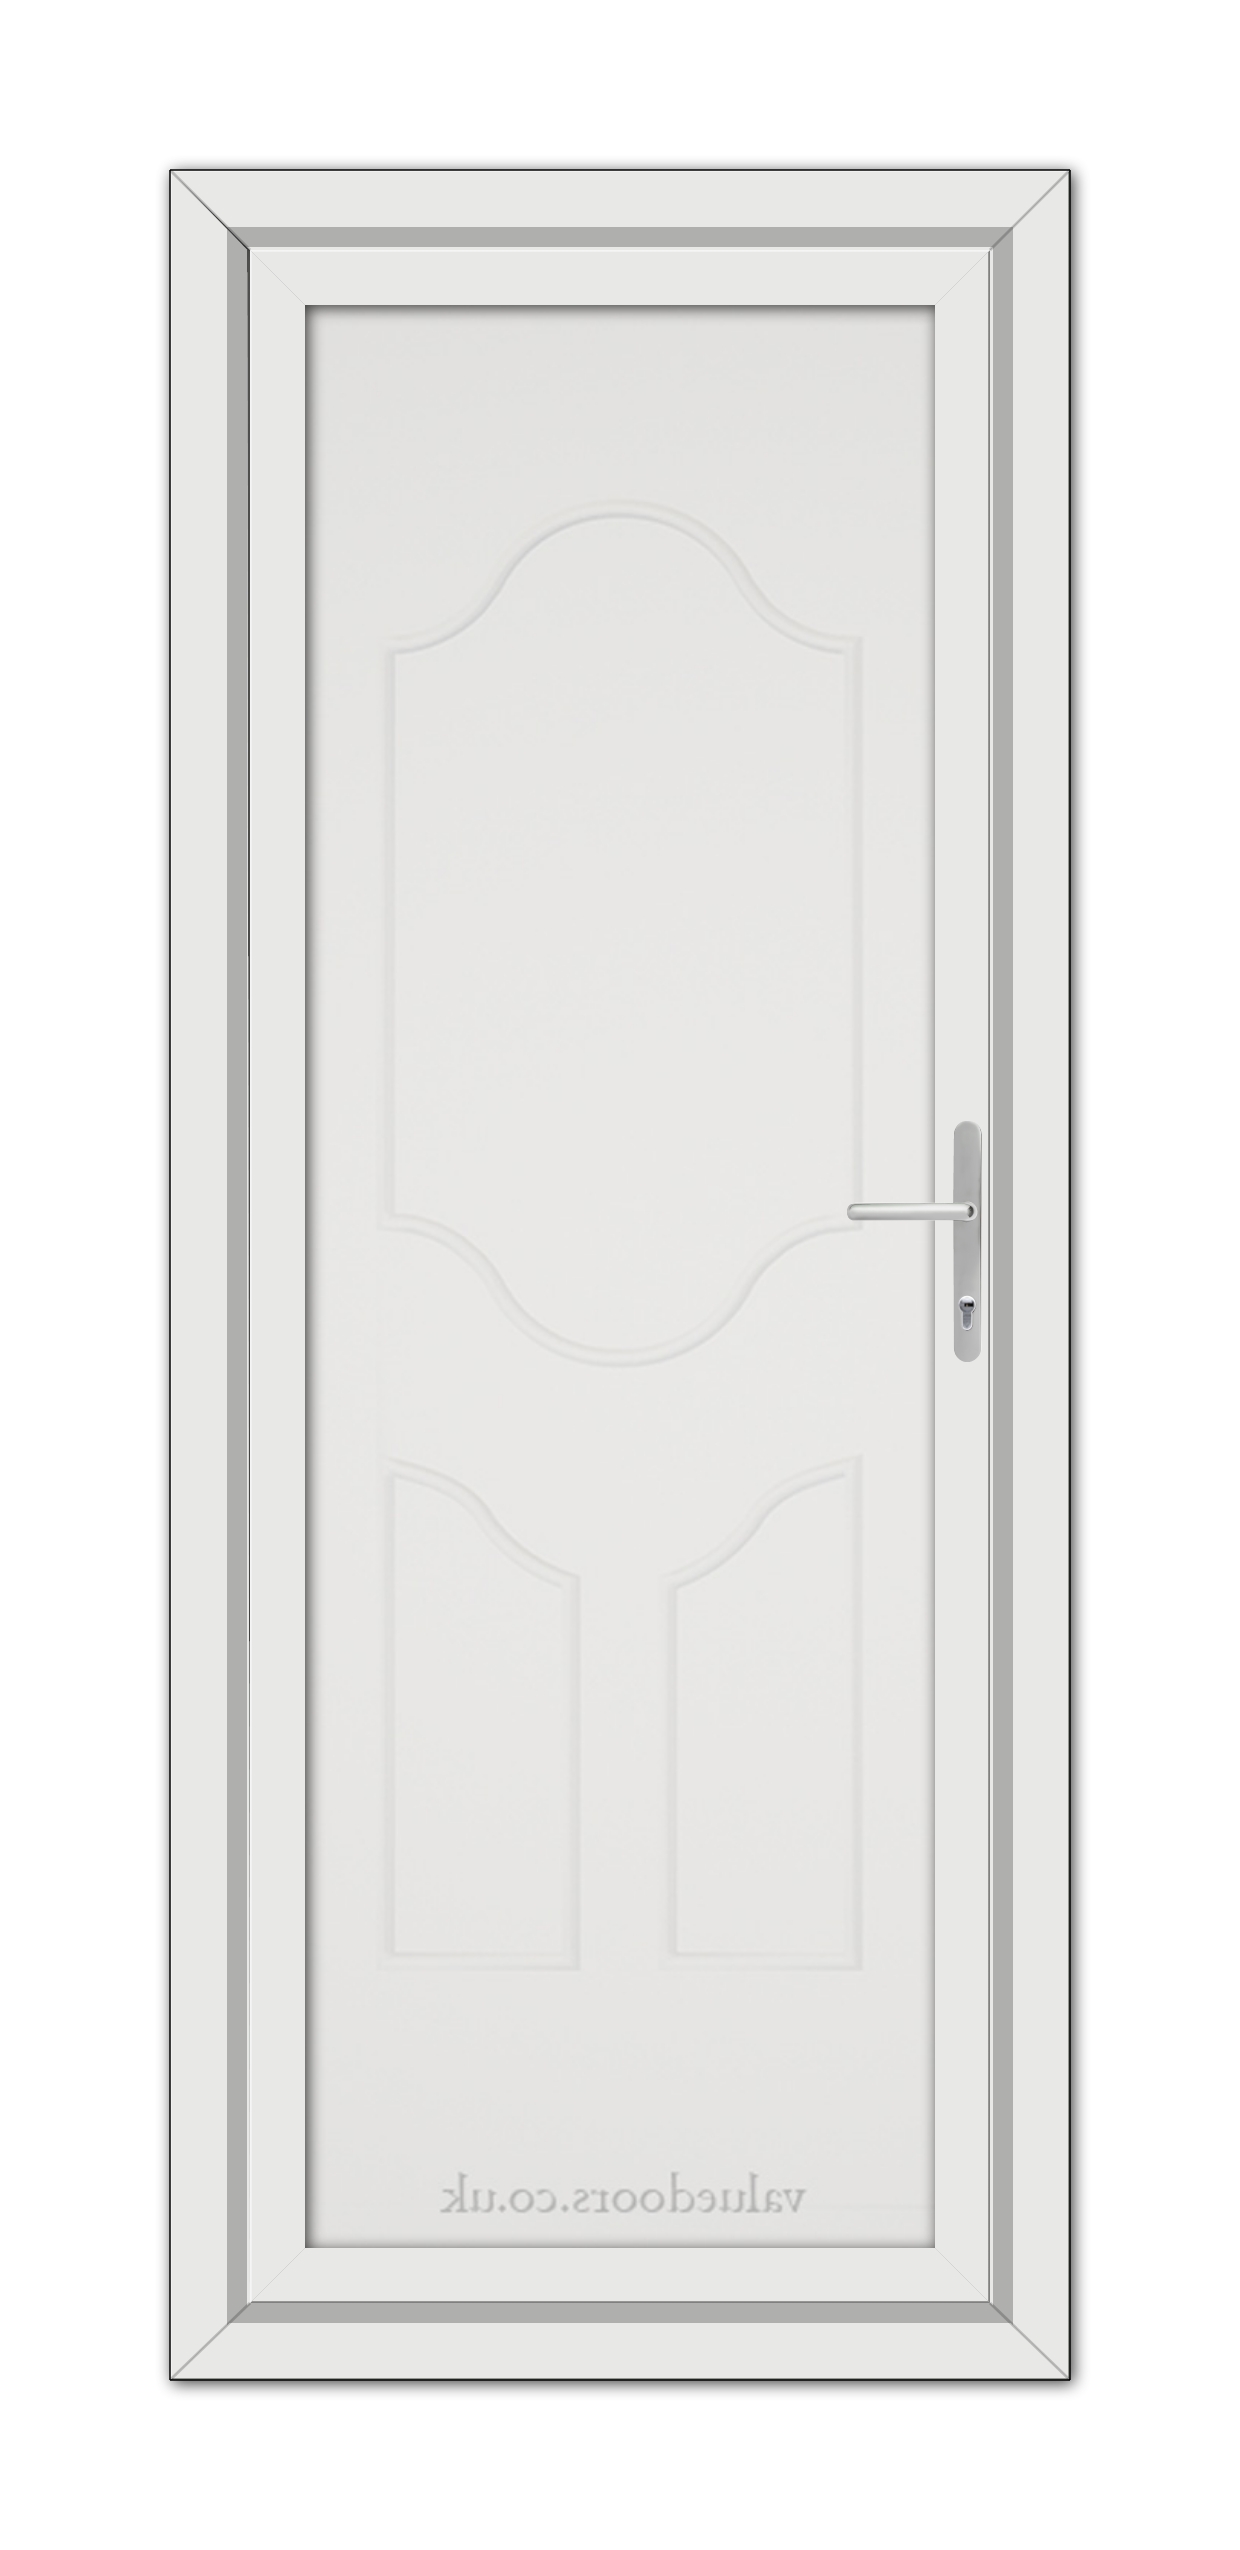 A vertical image of a closed White Althorpe Solid uPVC Door with a silver handle, set within a grey frame, presented against a white background.